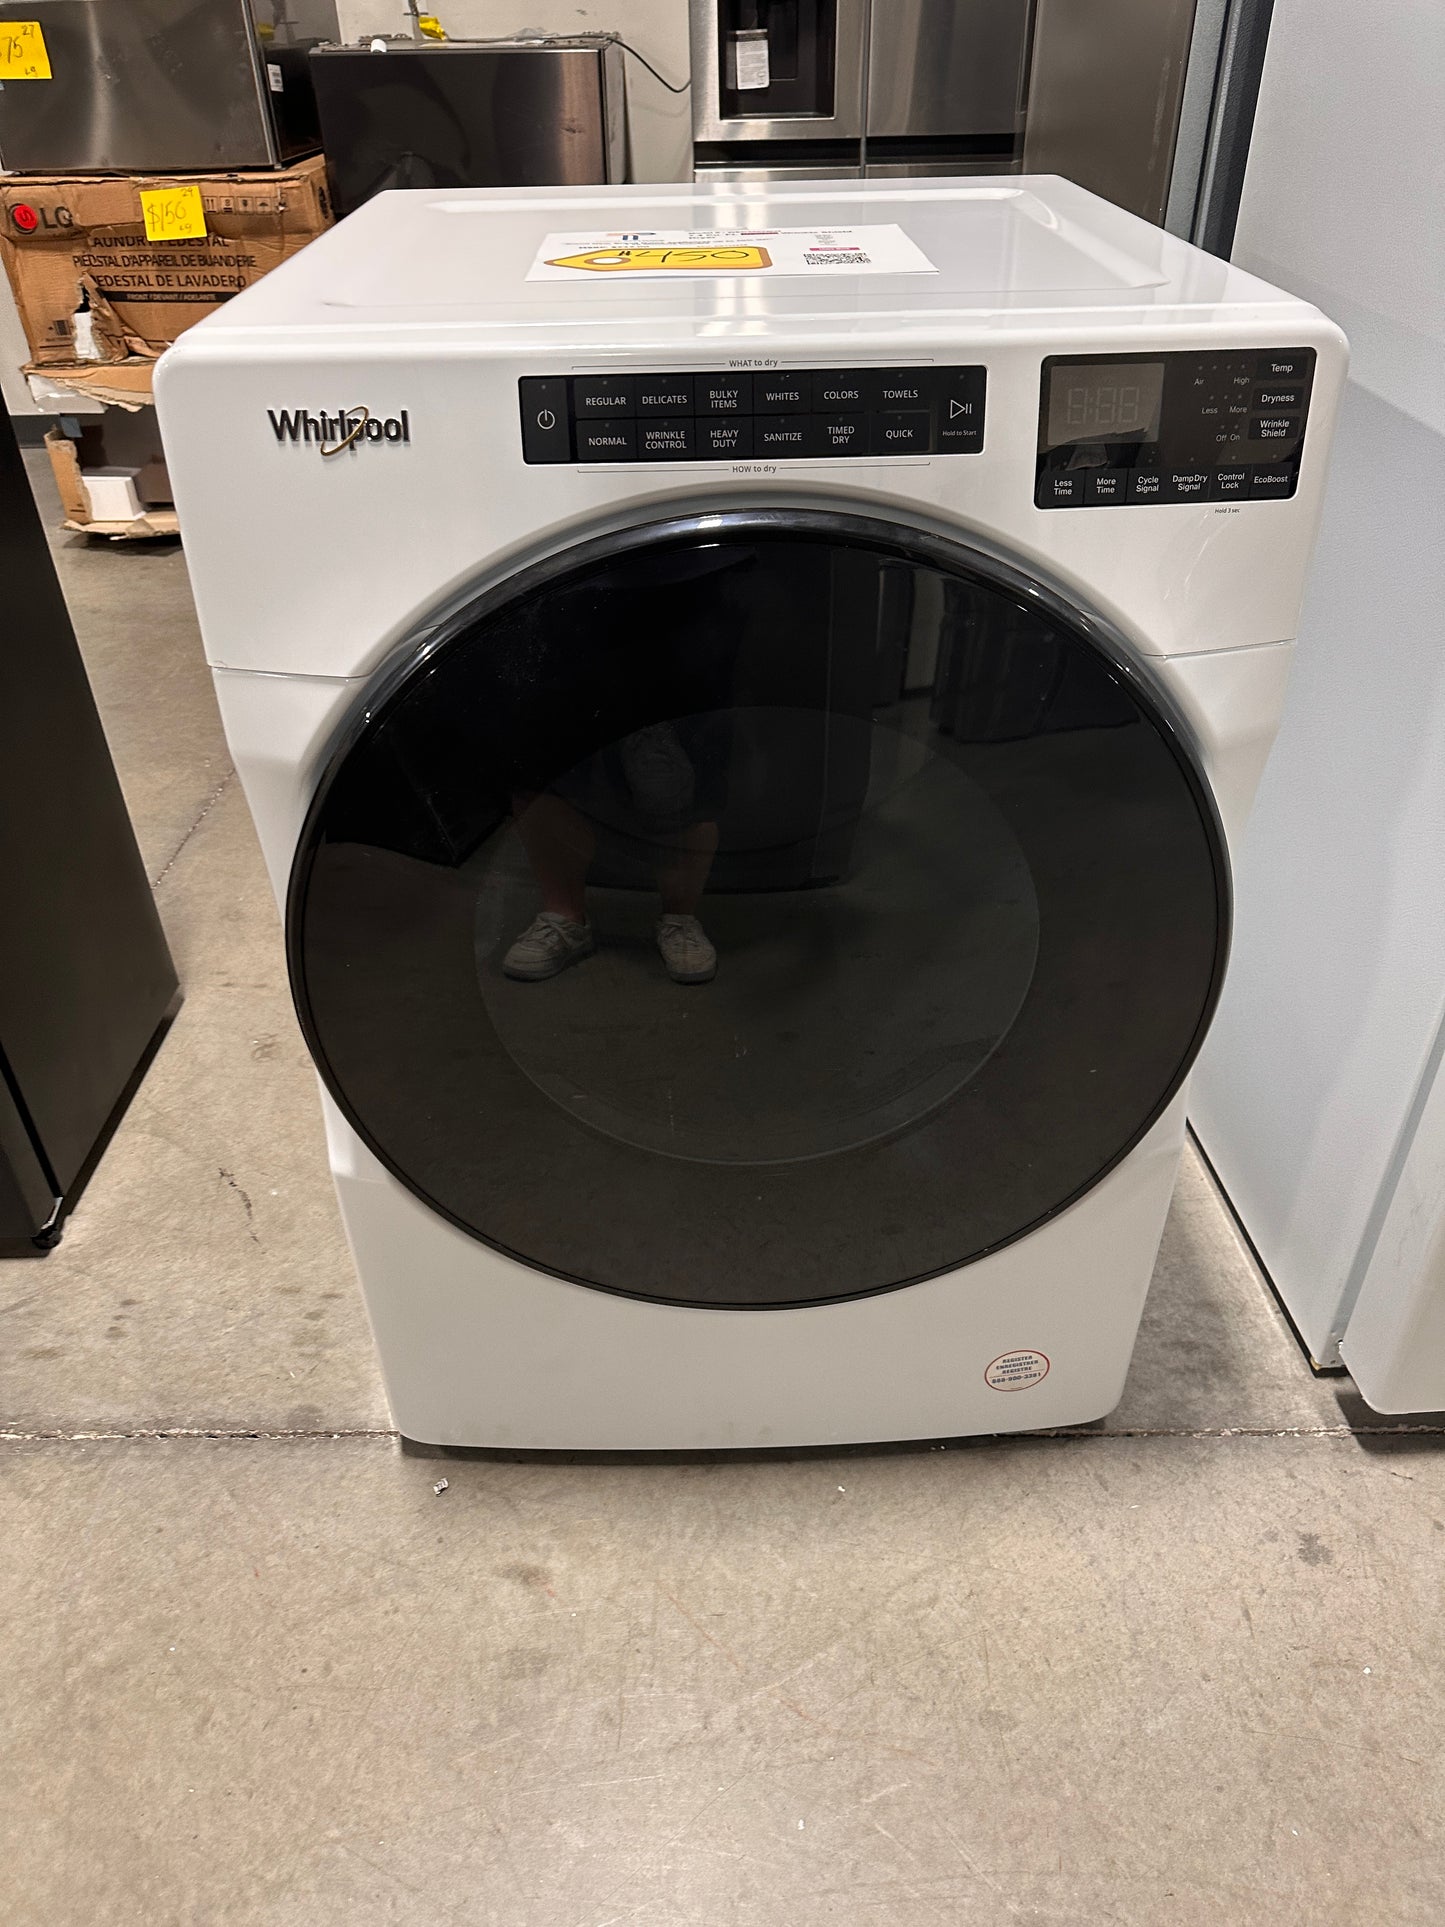 Whirlpool - 7.4 Cu. Ft. Stackable Electric Dryer with Wrinkle Shield - White  MODEL: WED5605MW  DRY12458